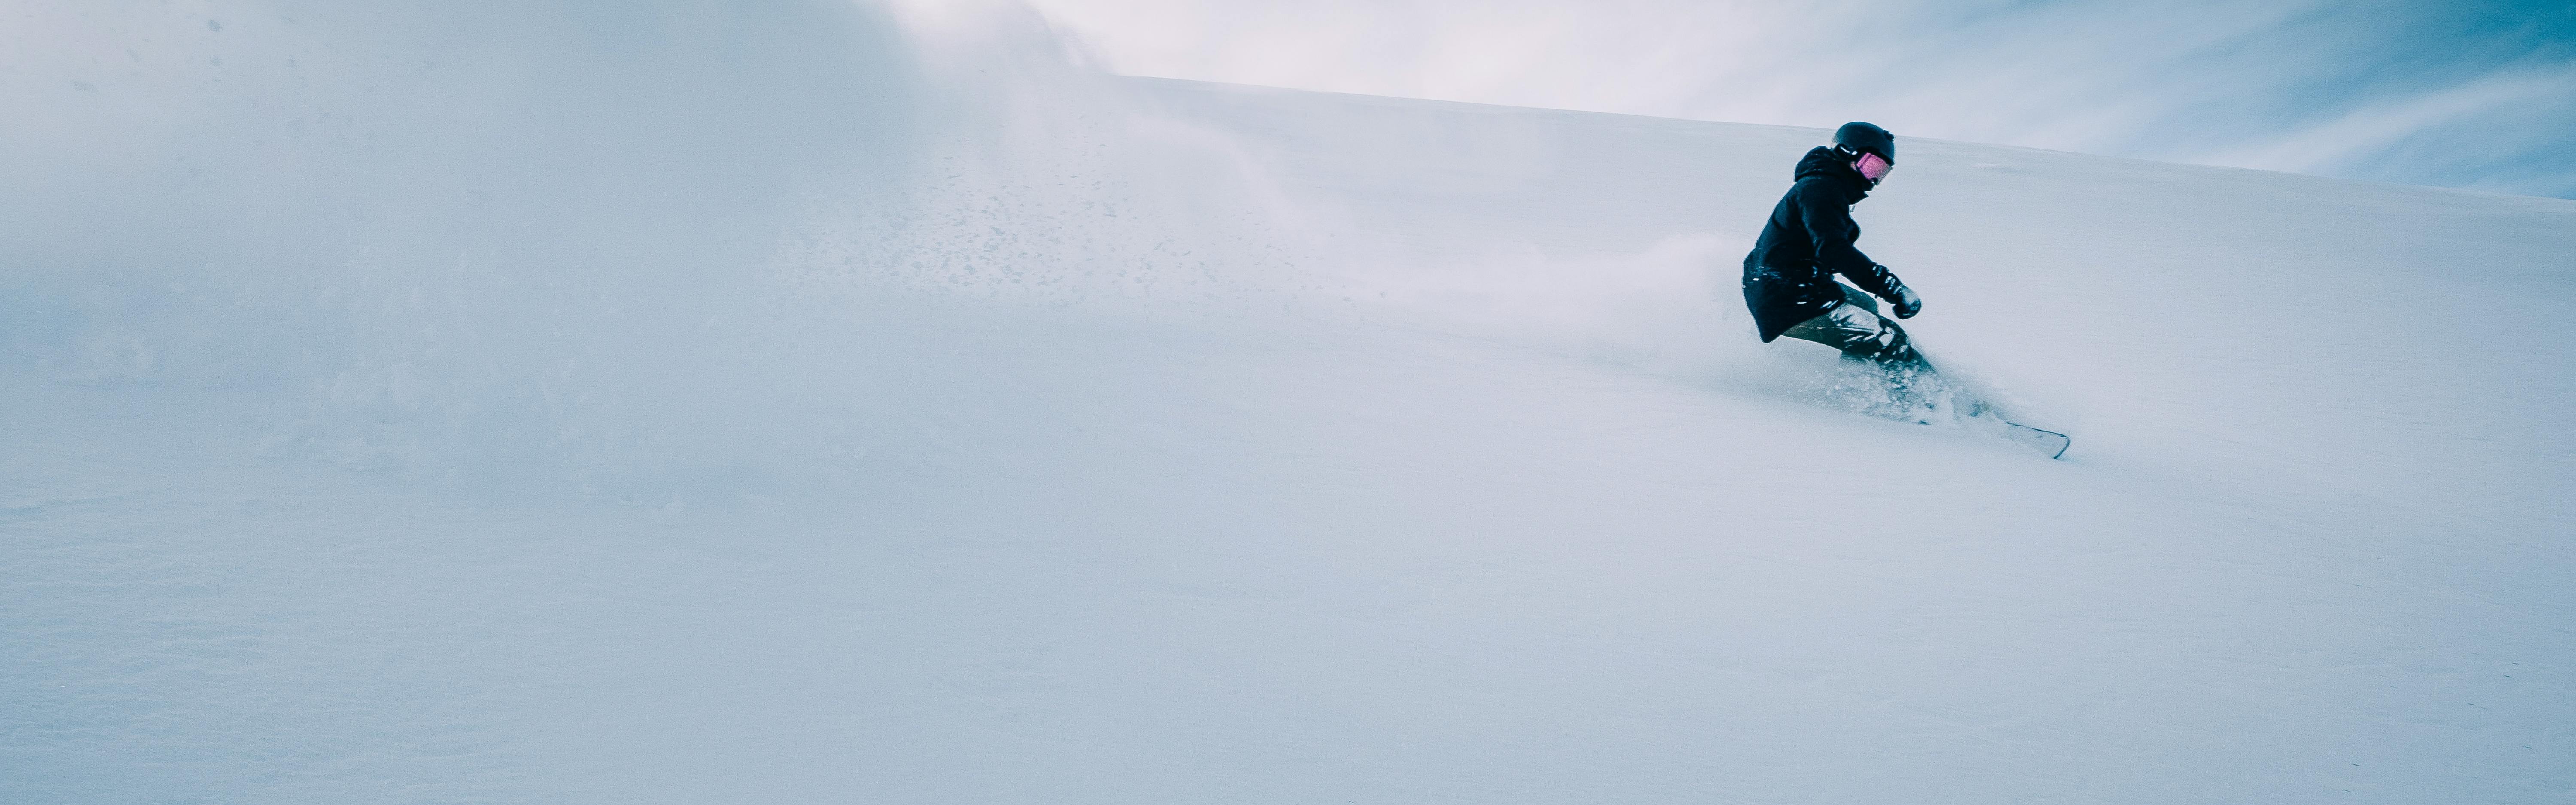 A snowboarder turns down a snowy hill. 